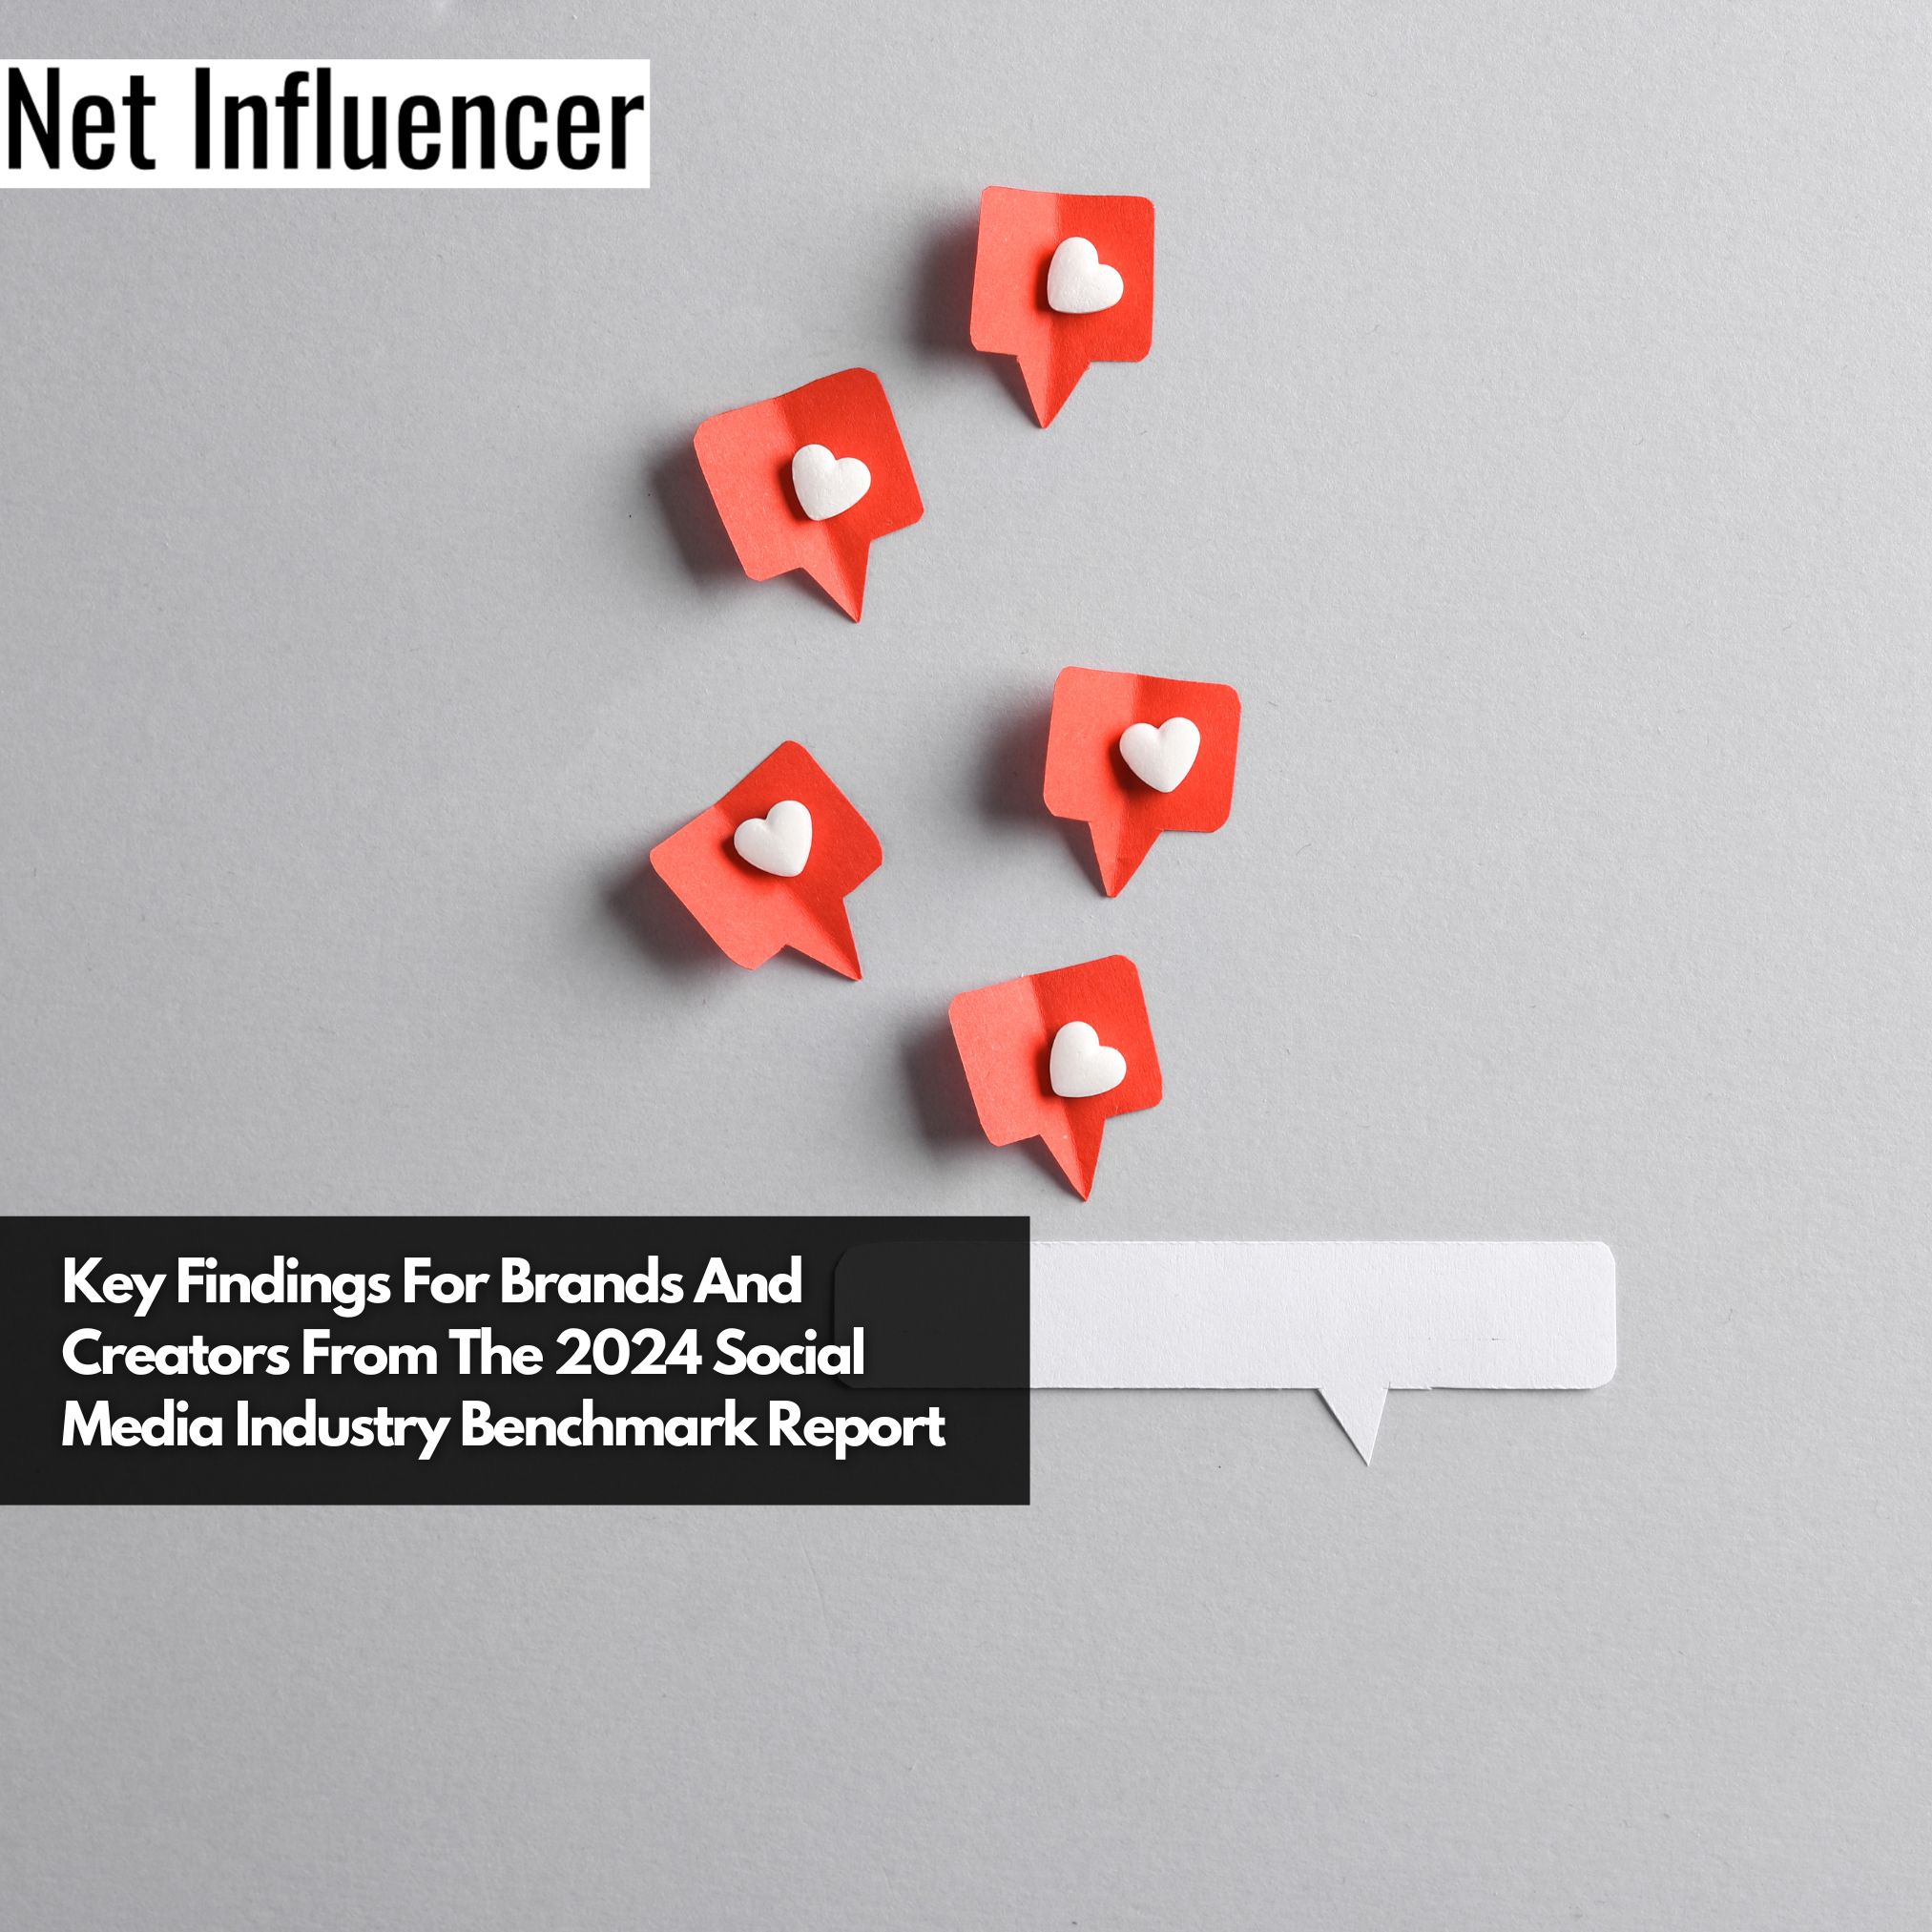 Key Findings For Brands And Creators From The 2024 Social Media Industry Benchmark Report